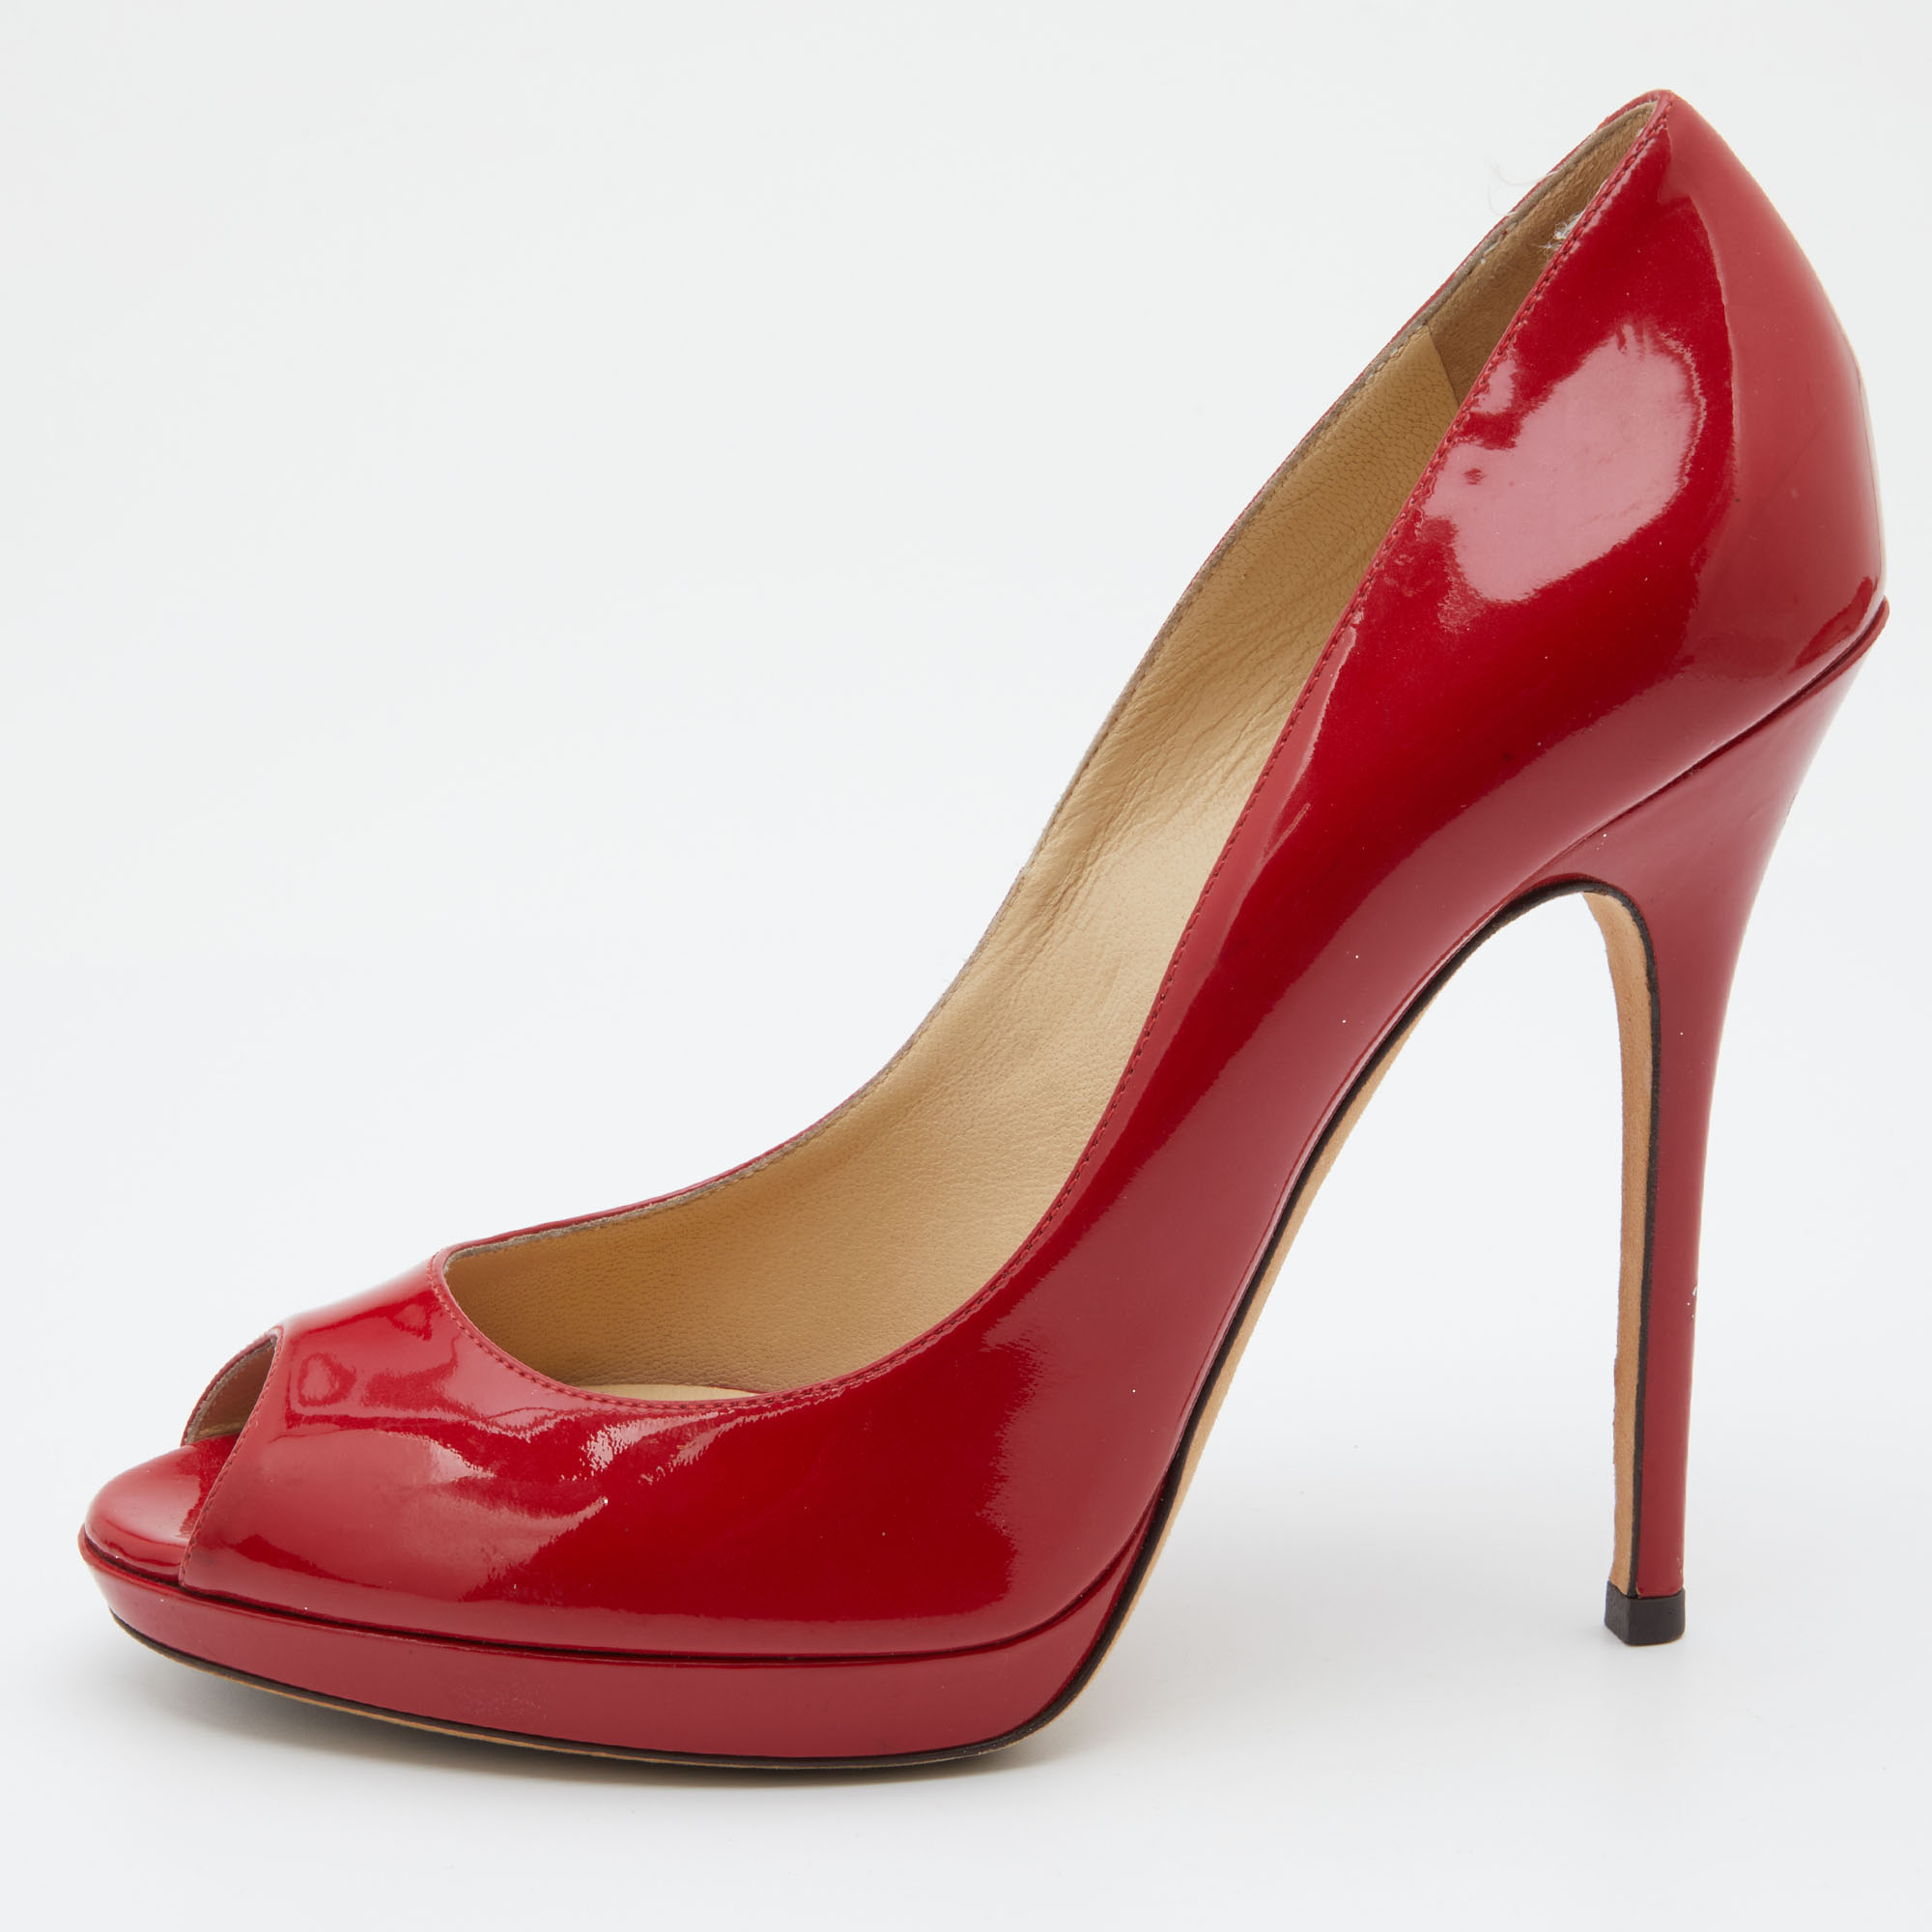 Pre-owned Jimmy Choo Red Patent Leather Crown Peep Toe Pumps Size 38